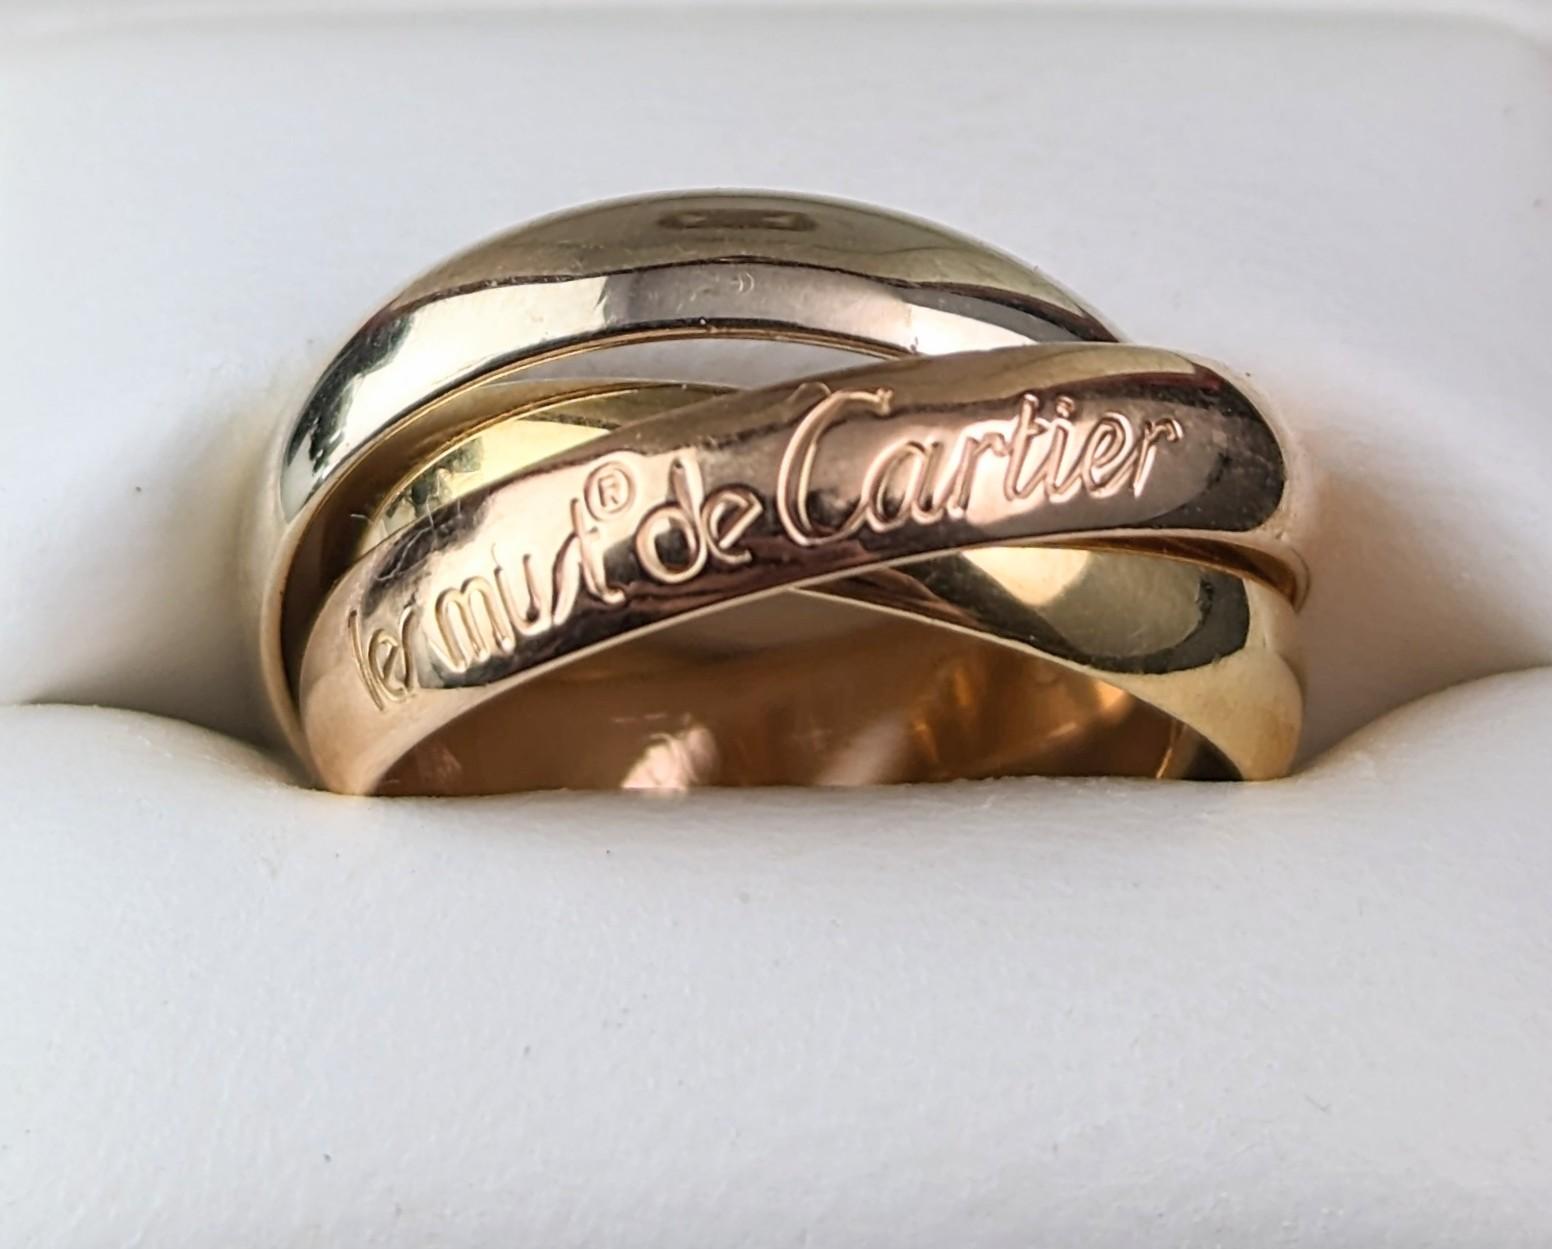 Vintage Les Must de Cartier Trinity band ring, 18k gold, Boxed  6